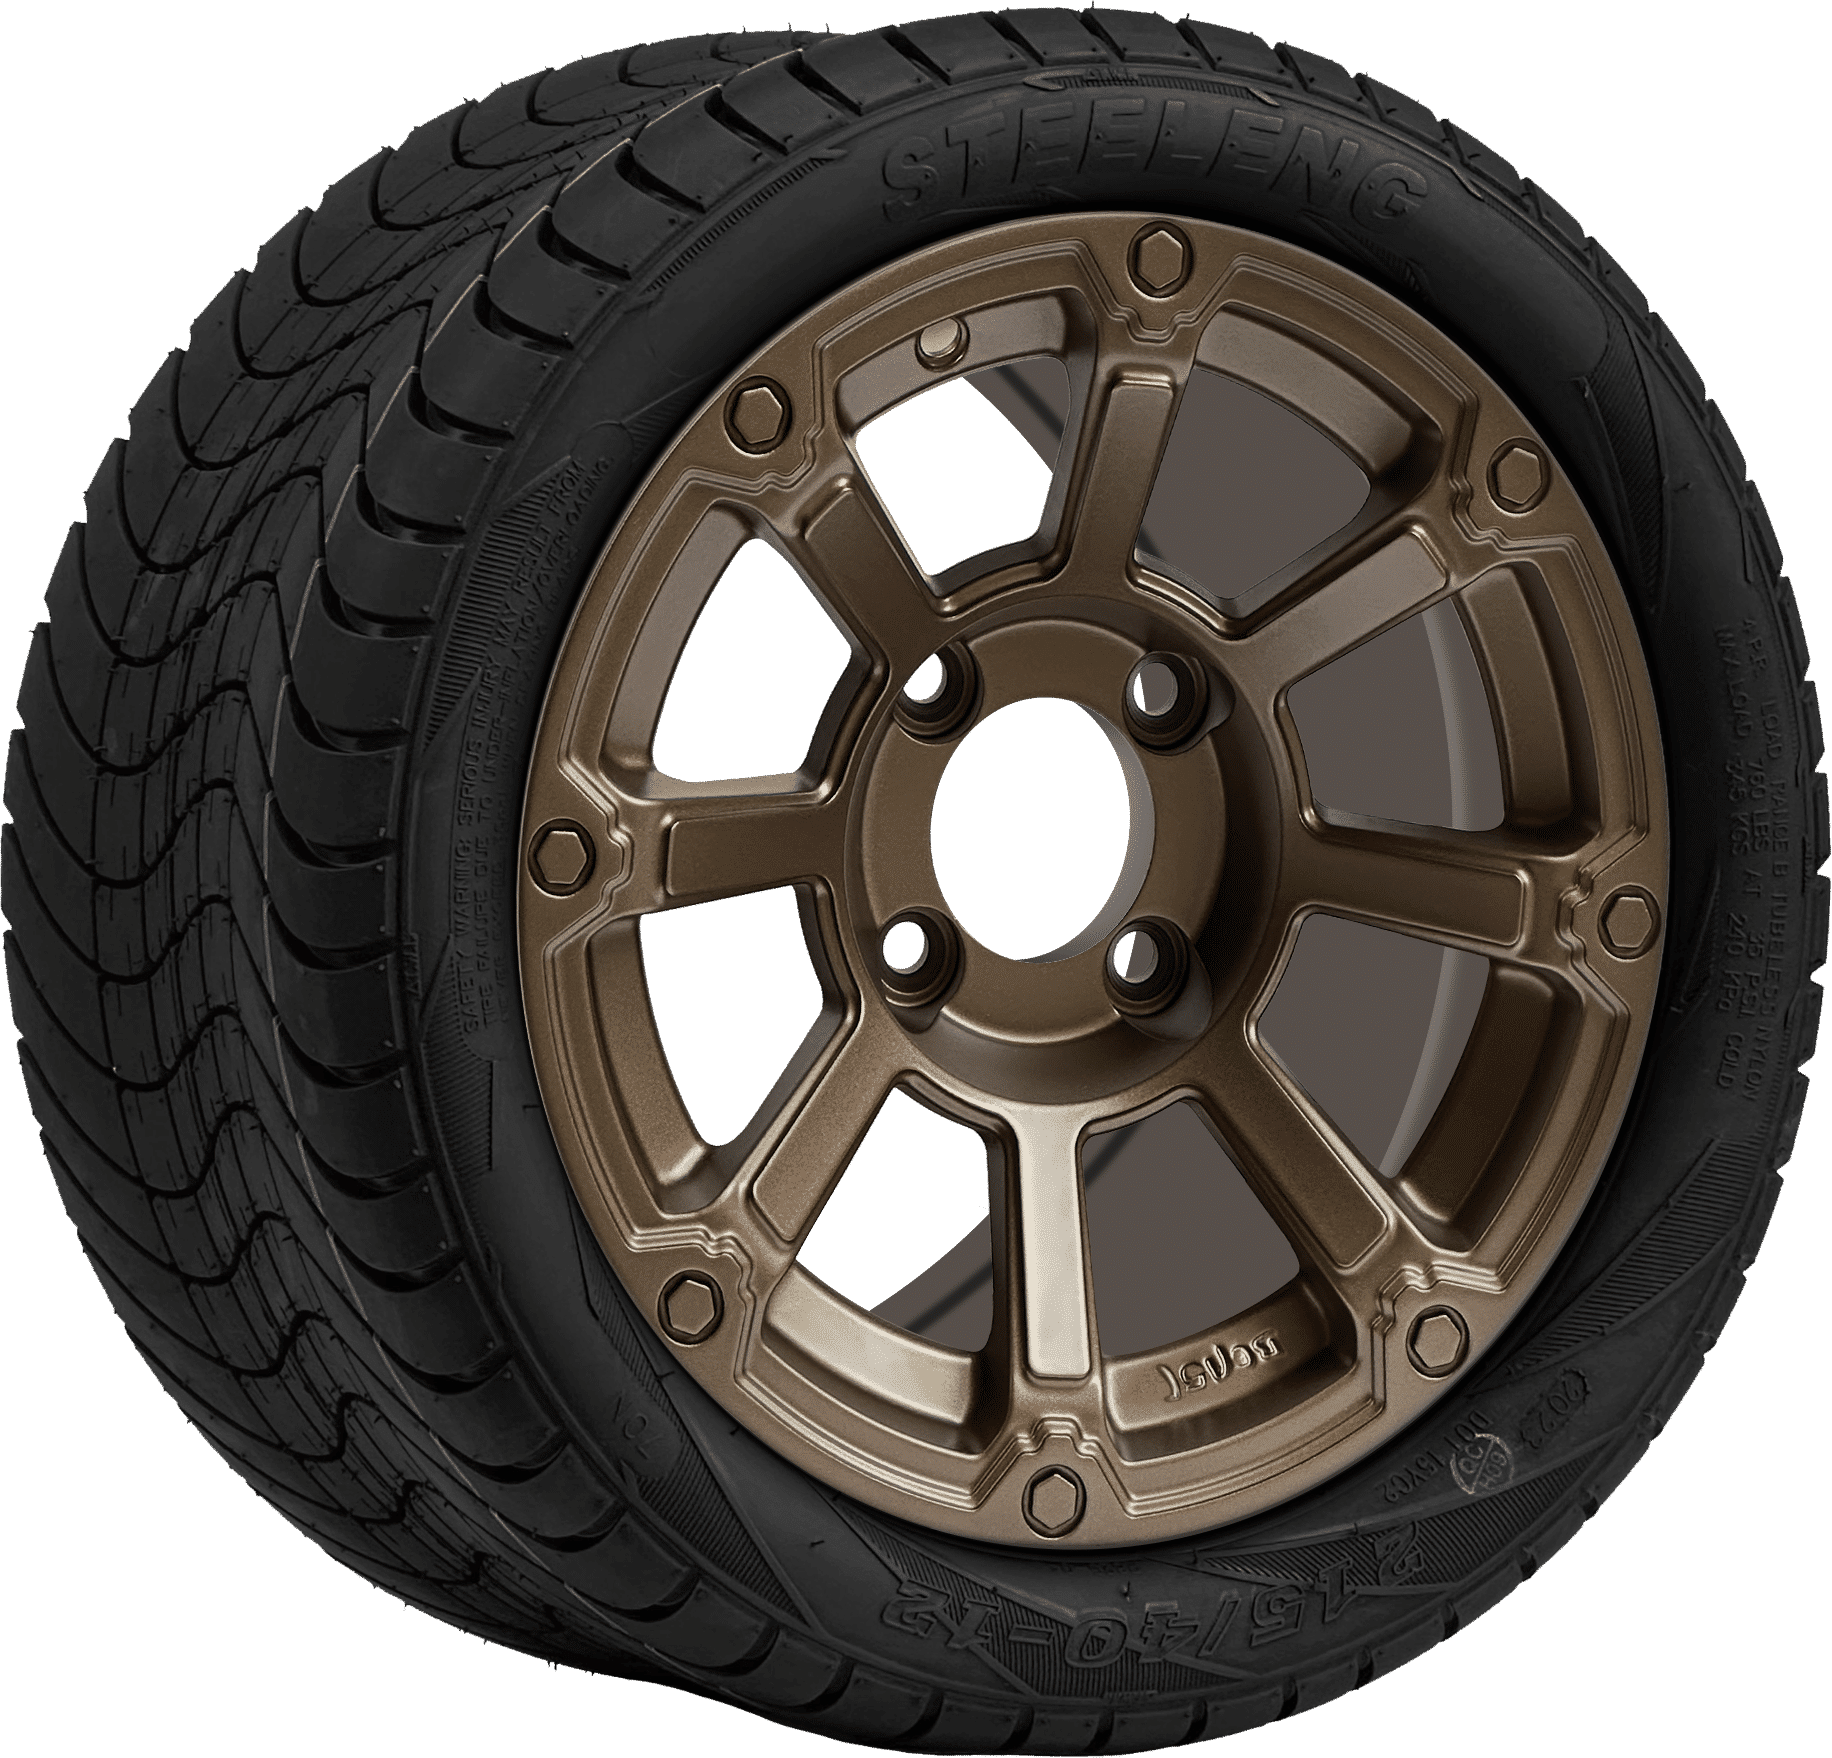 BNDL-TR1211-WH1263-CC0026-LN0005 12″ CYCLOPS BRONZE WHEEL – ALUMINUM ALLOY / STEELENG 215/40-12 LOW PROFILE TIRE DOT APPROVED